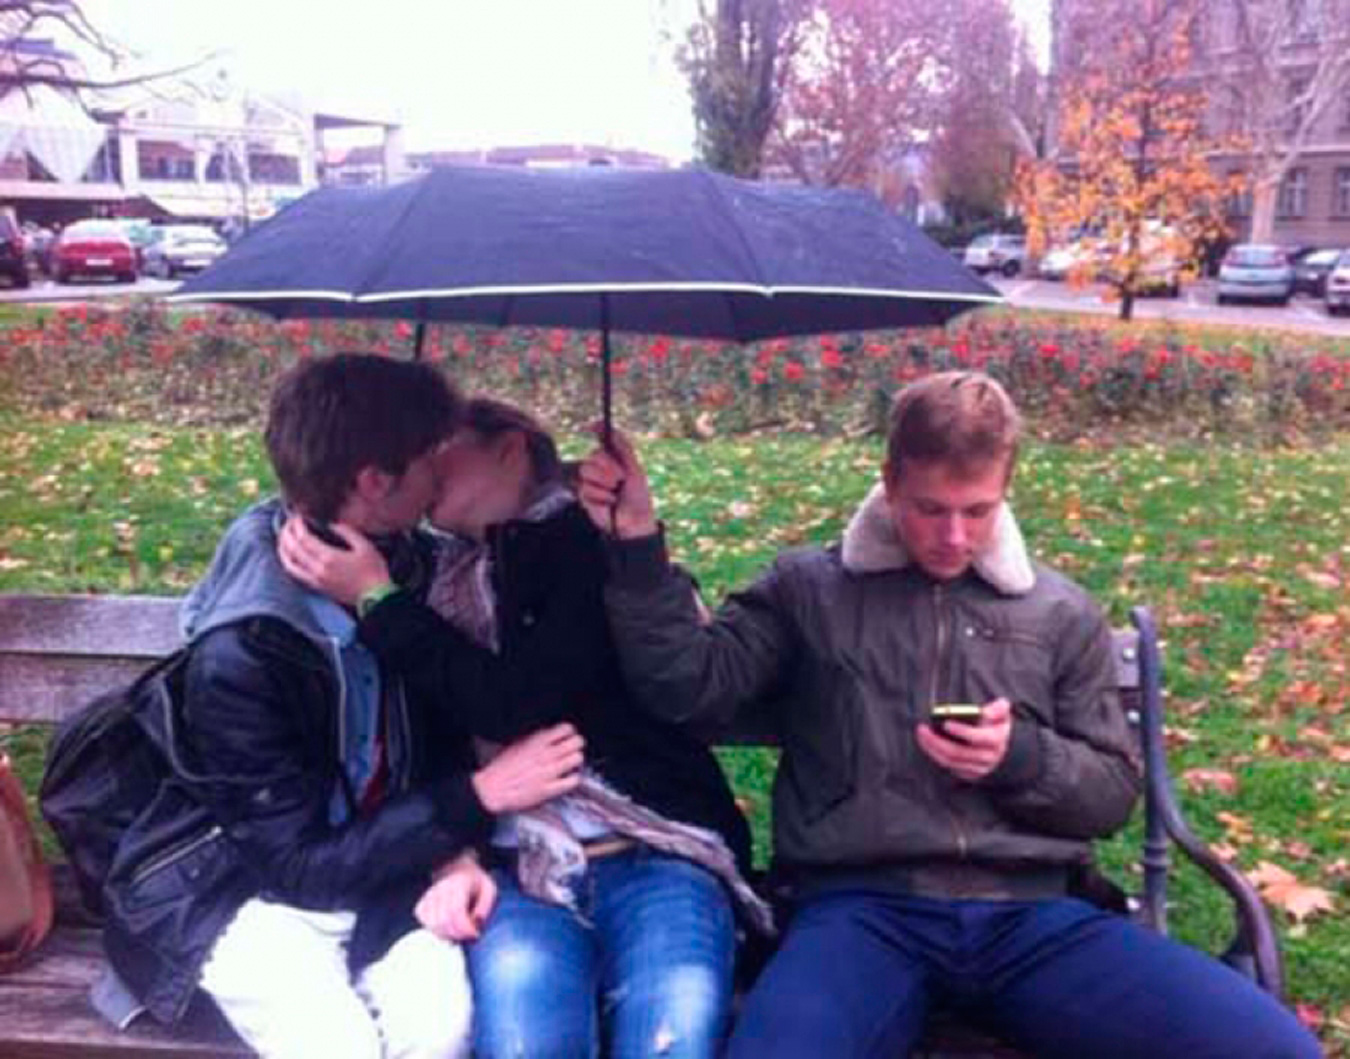 Guy holding umbrella next to couple making out Blank Meme Template